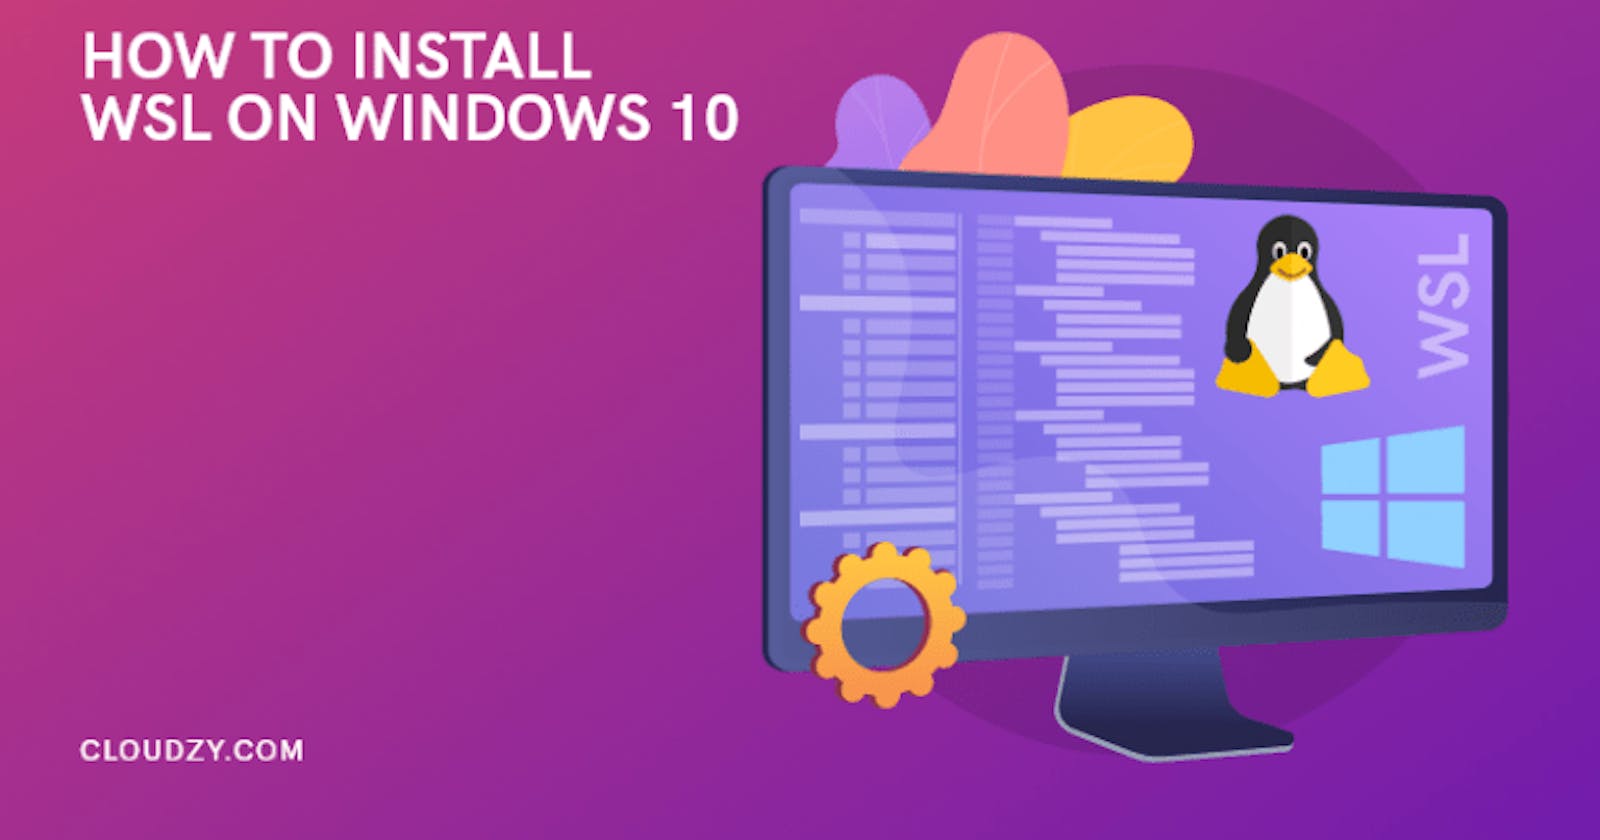 Introducing the Windows Subsystem for Linux! Plus: Learn How to Fix WSL Errors